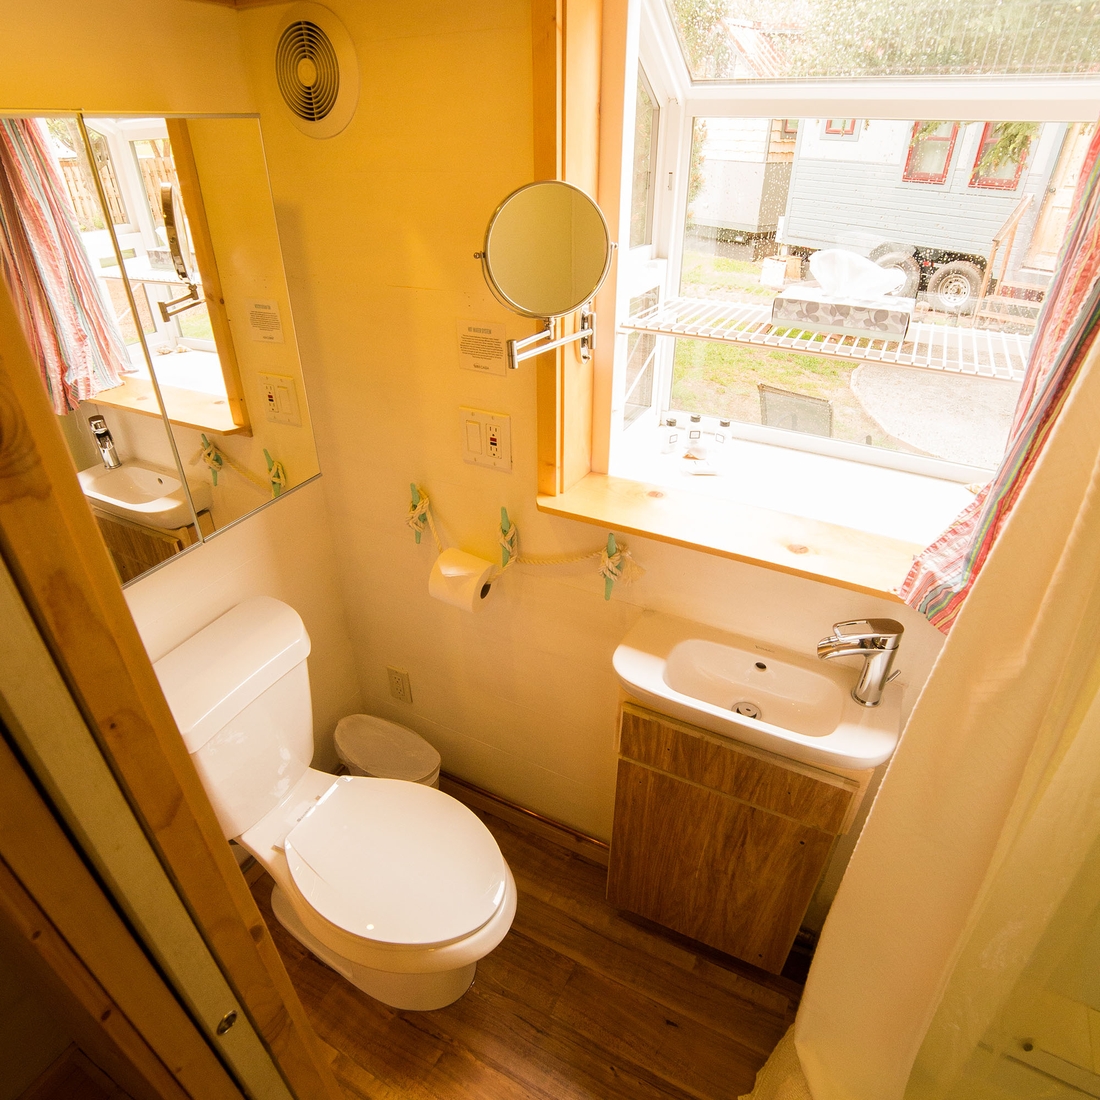 06-Toilet-and-Sink-WeeCasa-The-Pequod-Tiny-House-Architecture-www-designstack-co